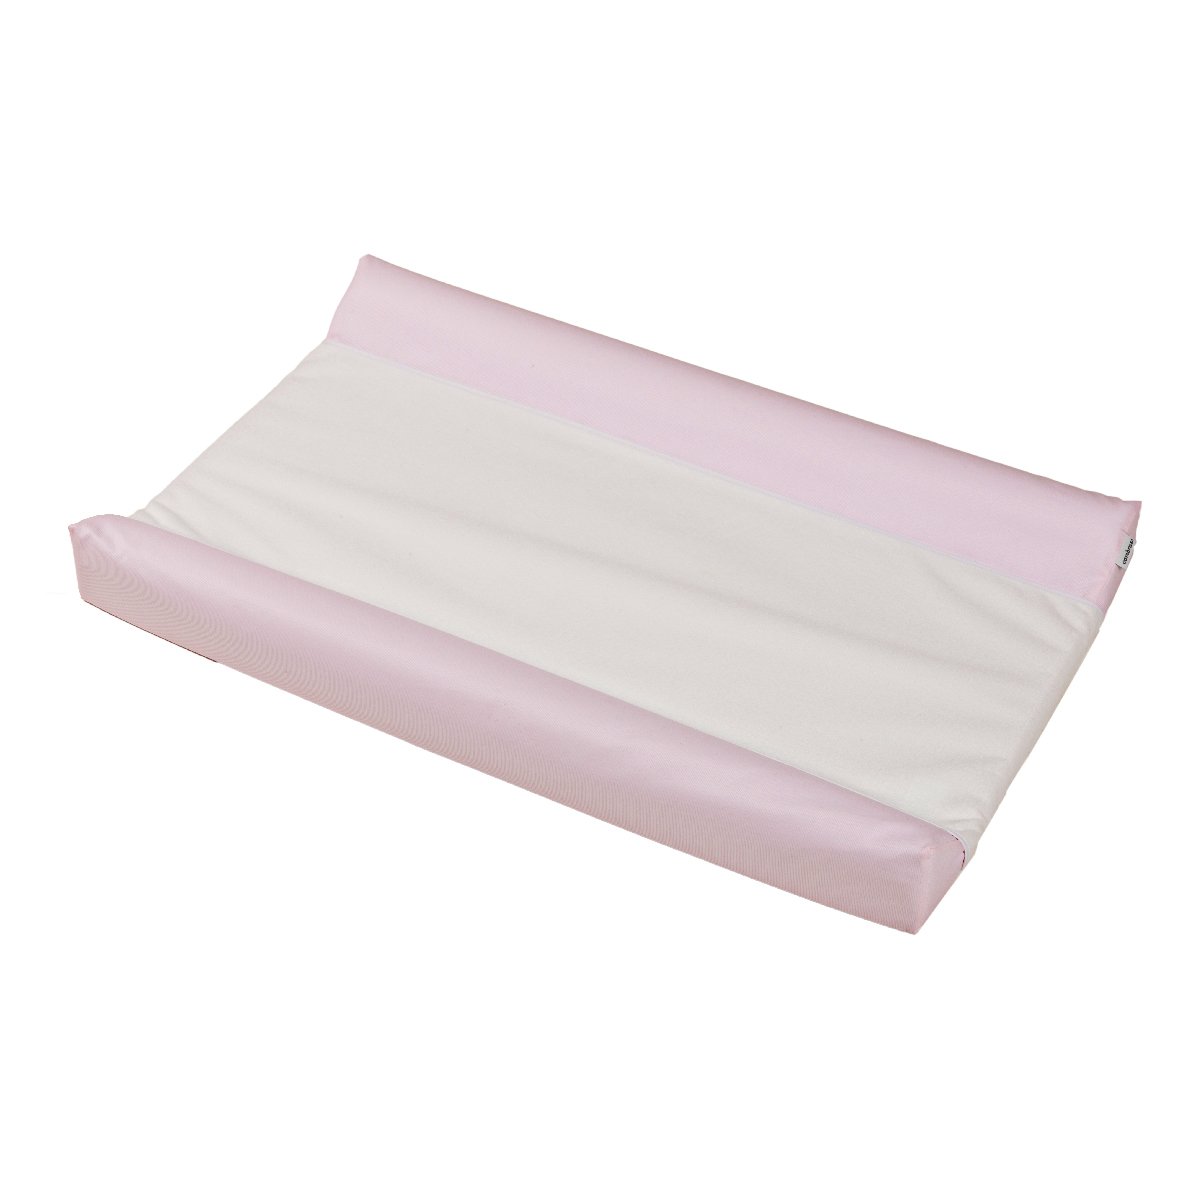 Cambrass 39575 Foam Changing Mat 47 x 80 cm in Crown PINK